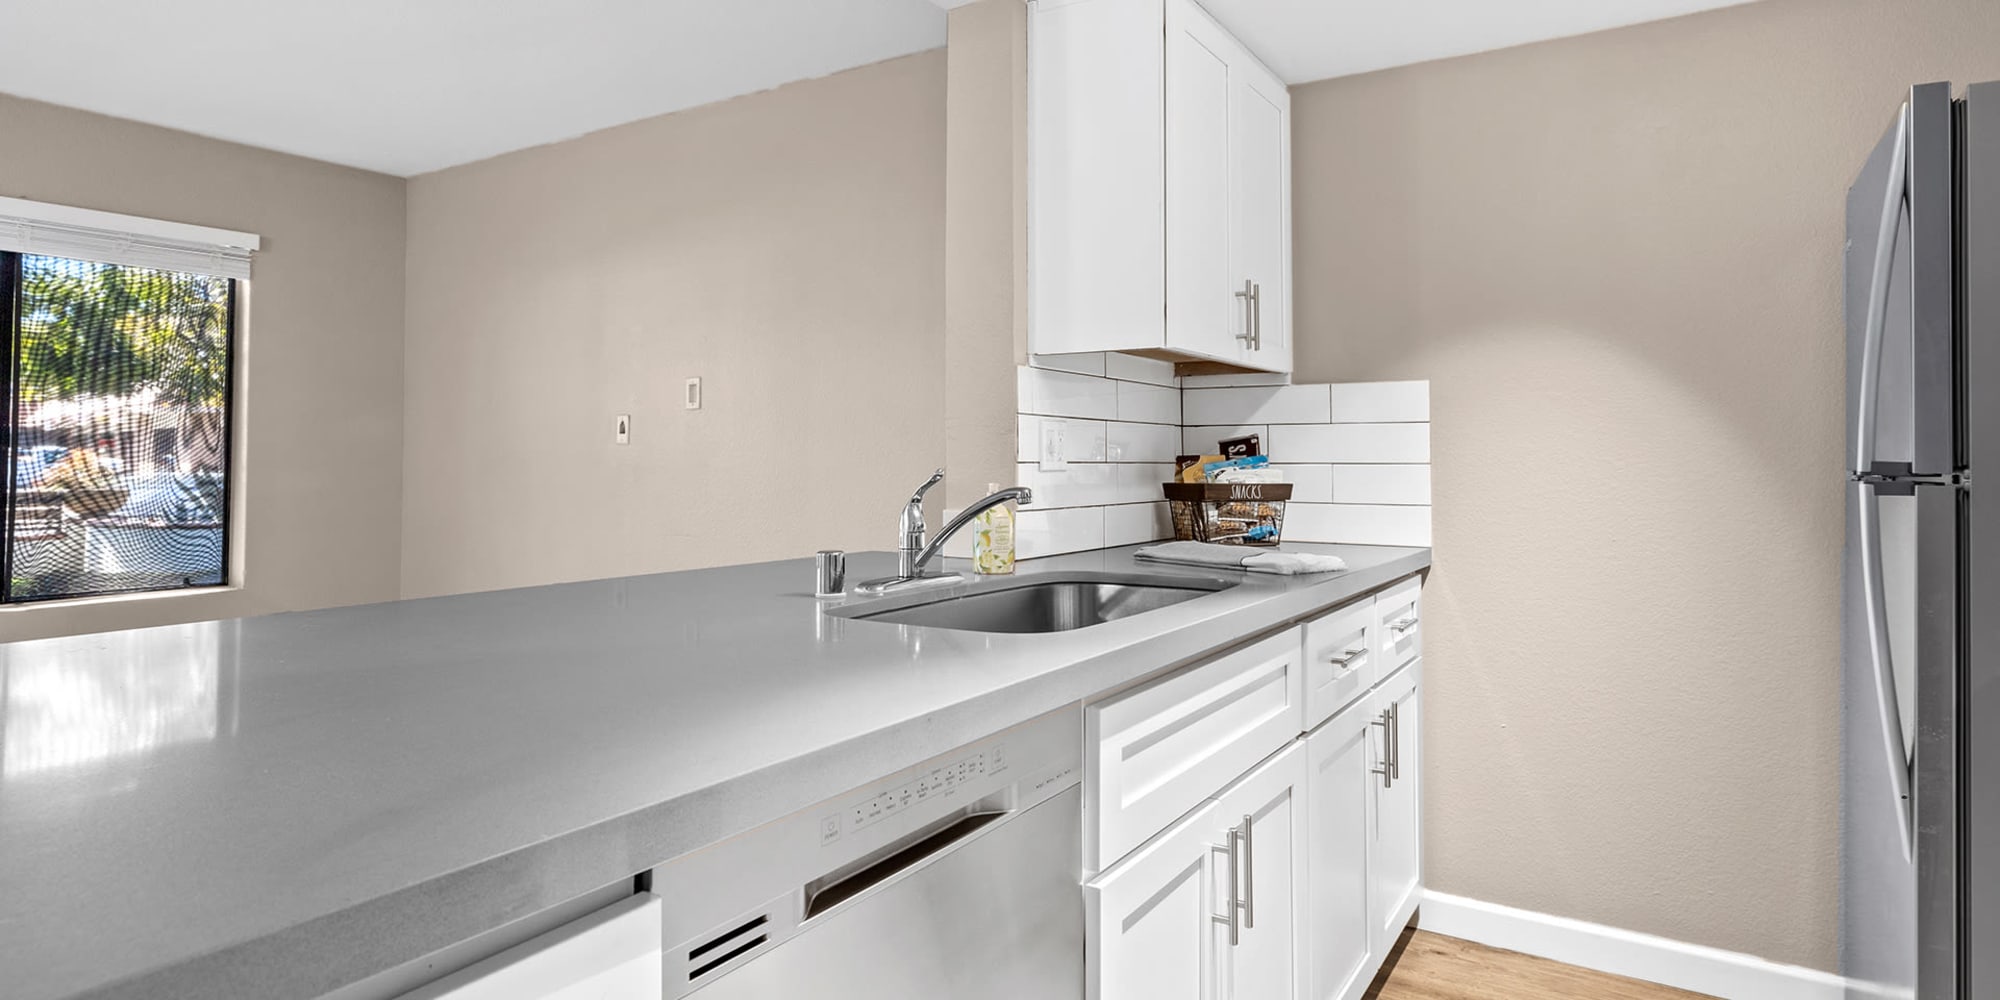 Kitchen with updated appliances at Trails at Grand Terrace in Colton, California